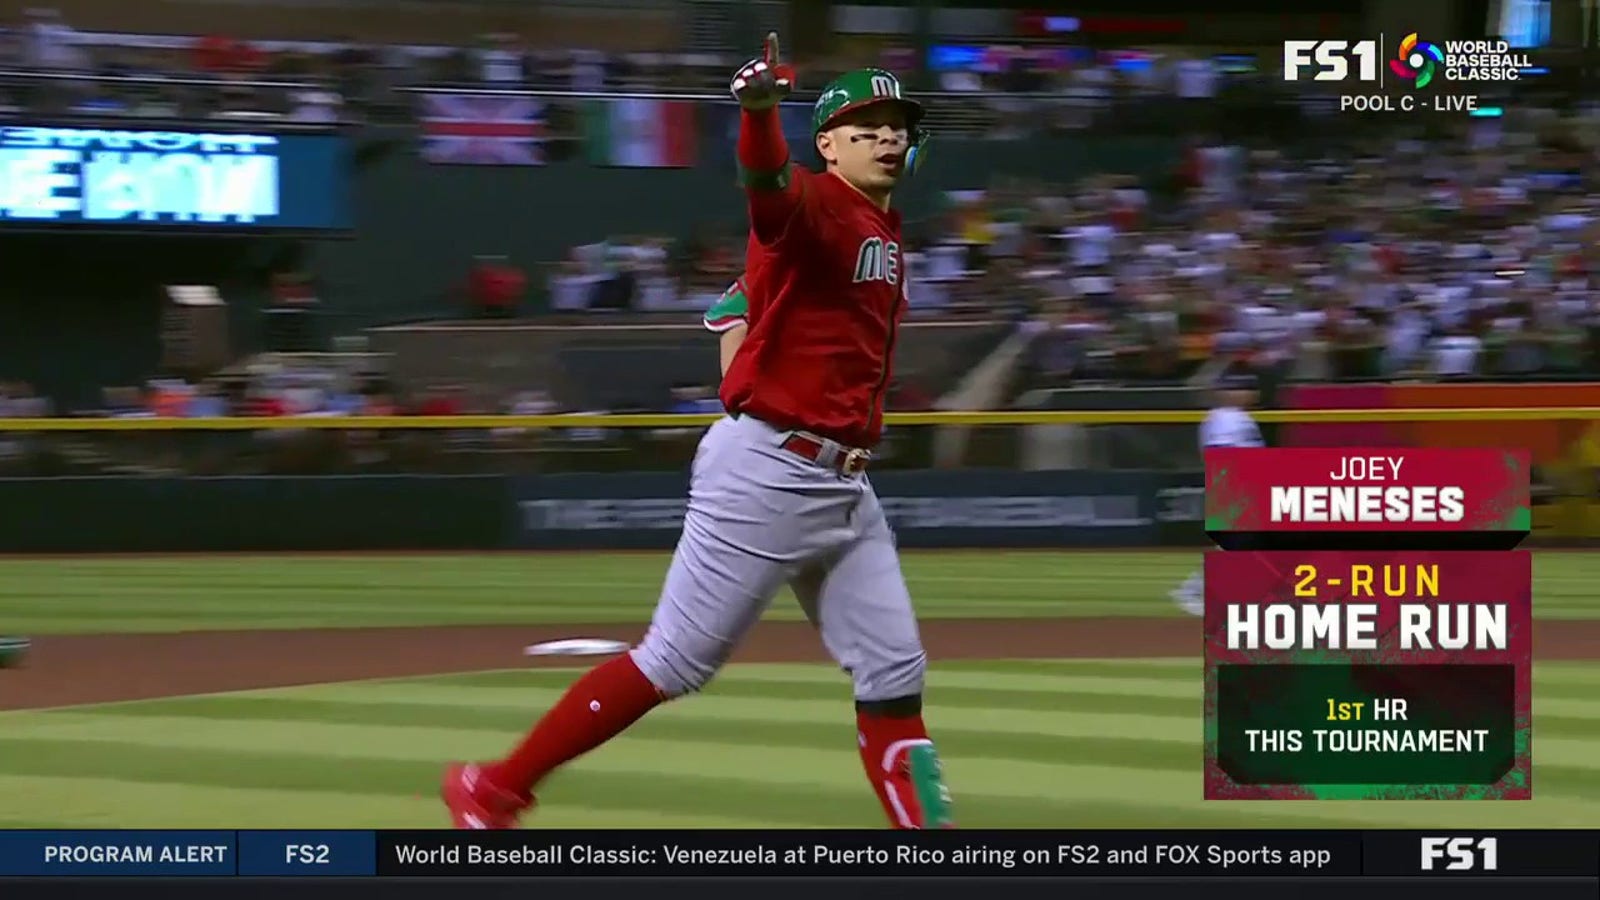 Joey Meneses cranks a two-run homer as Mexico takes a 2-0 lead over the USA